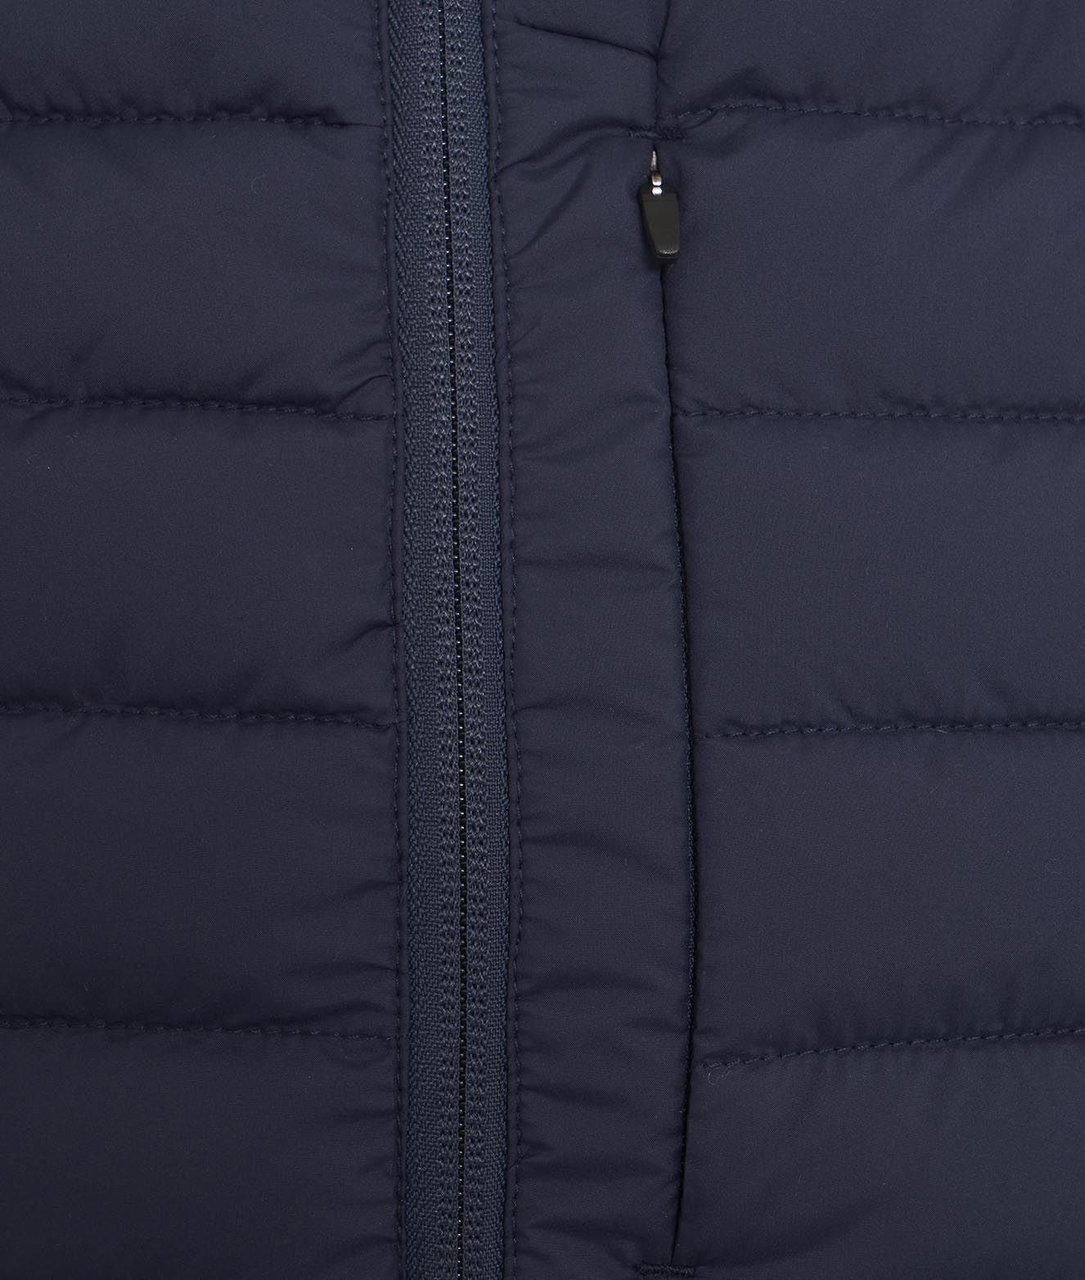 Save the Duck Eco down vest "Dave" Blauw